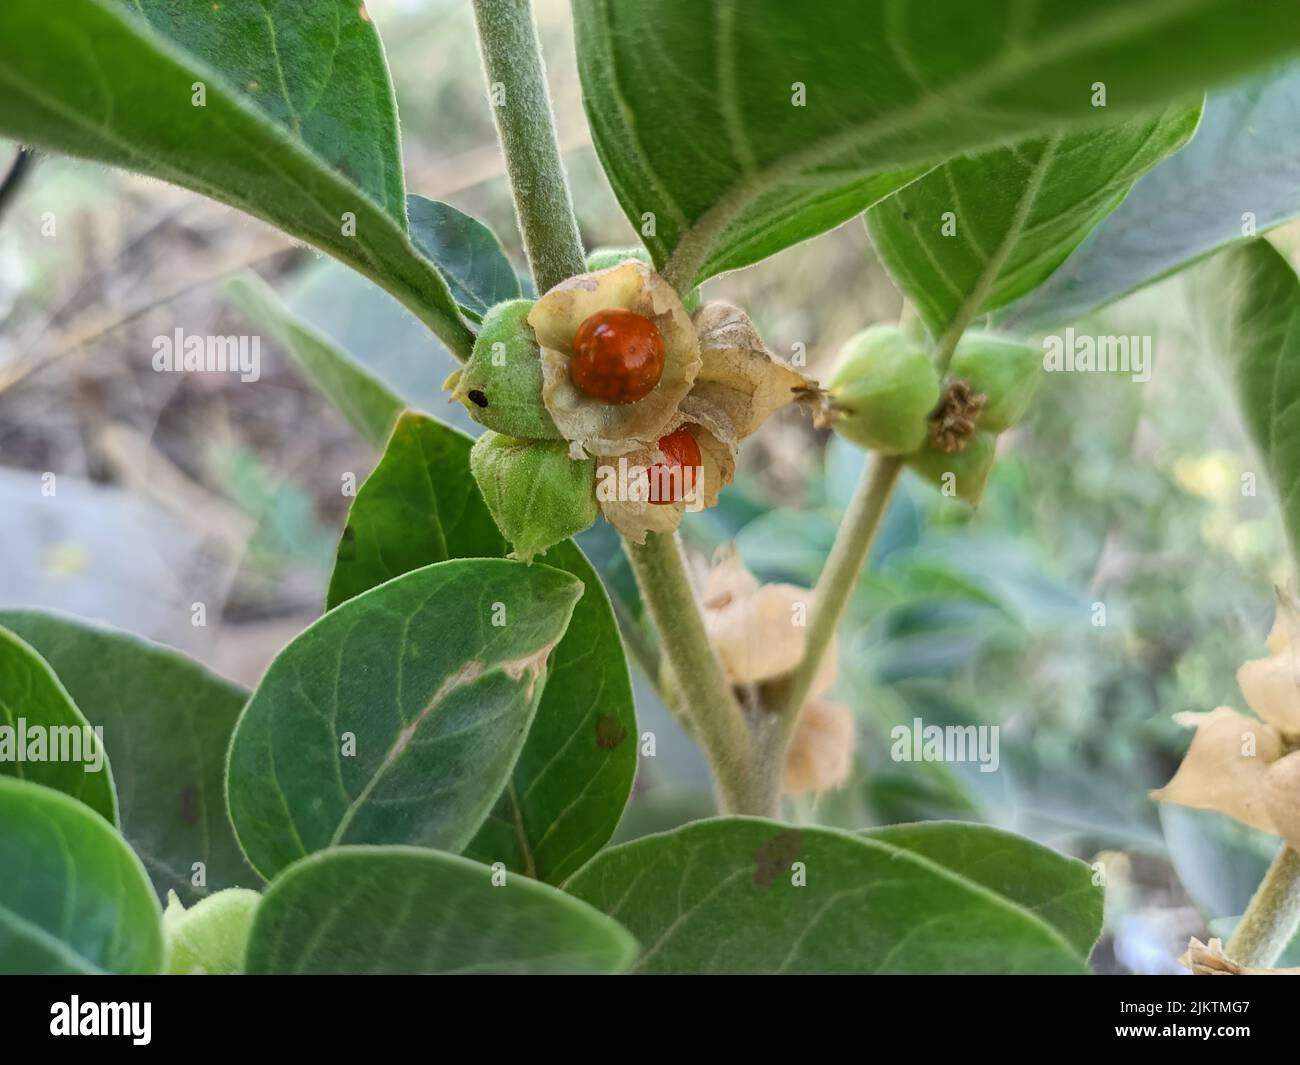 Ashwagandha, withania somnifera, winter cherry, indian gooseberry, poison gooseberry, plant with fruit and leaves, ayurvedic medicine plant or herbal Stock Photo